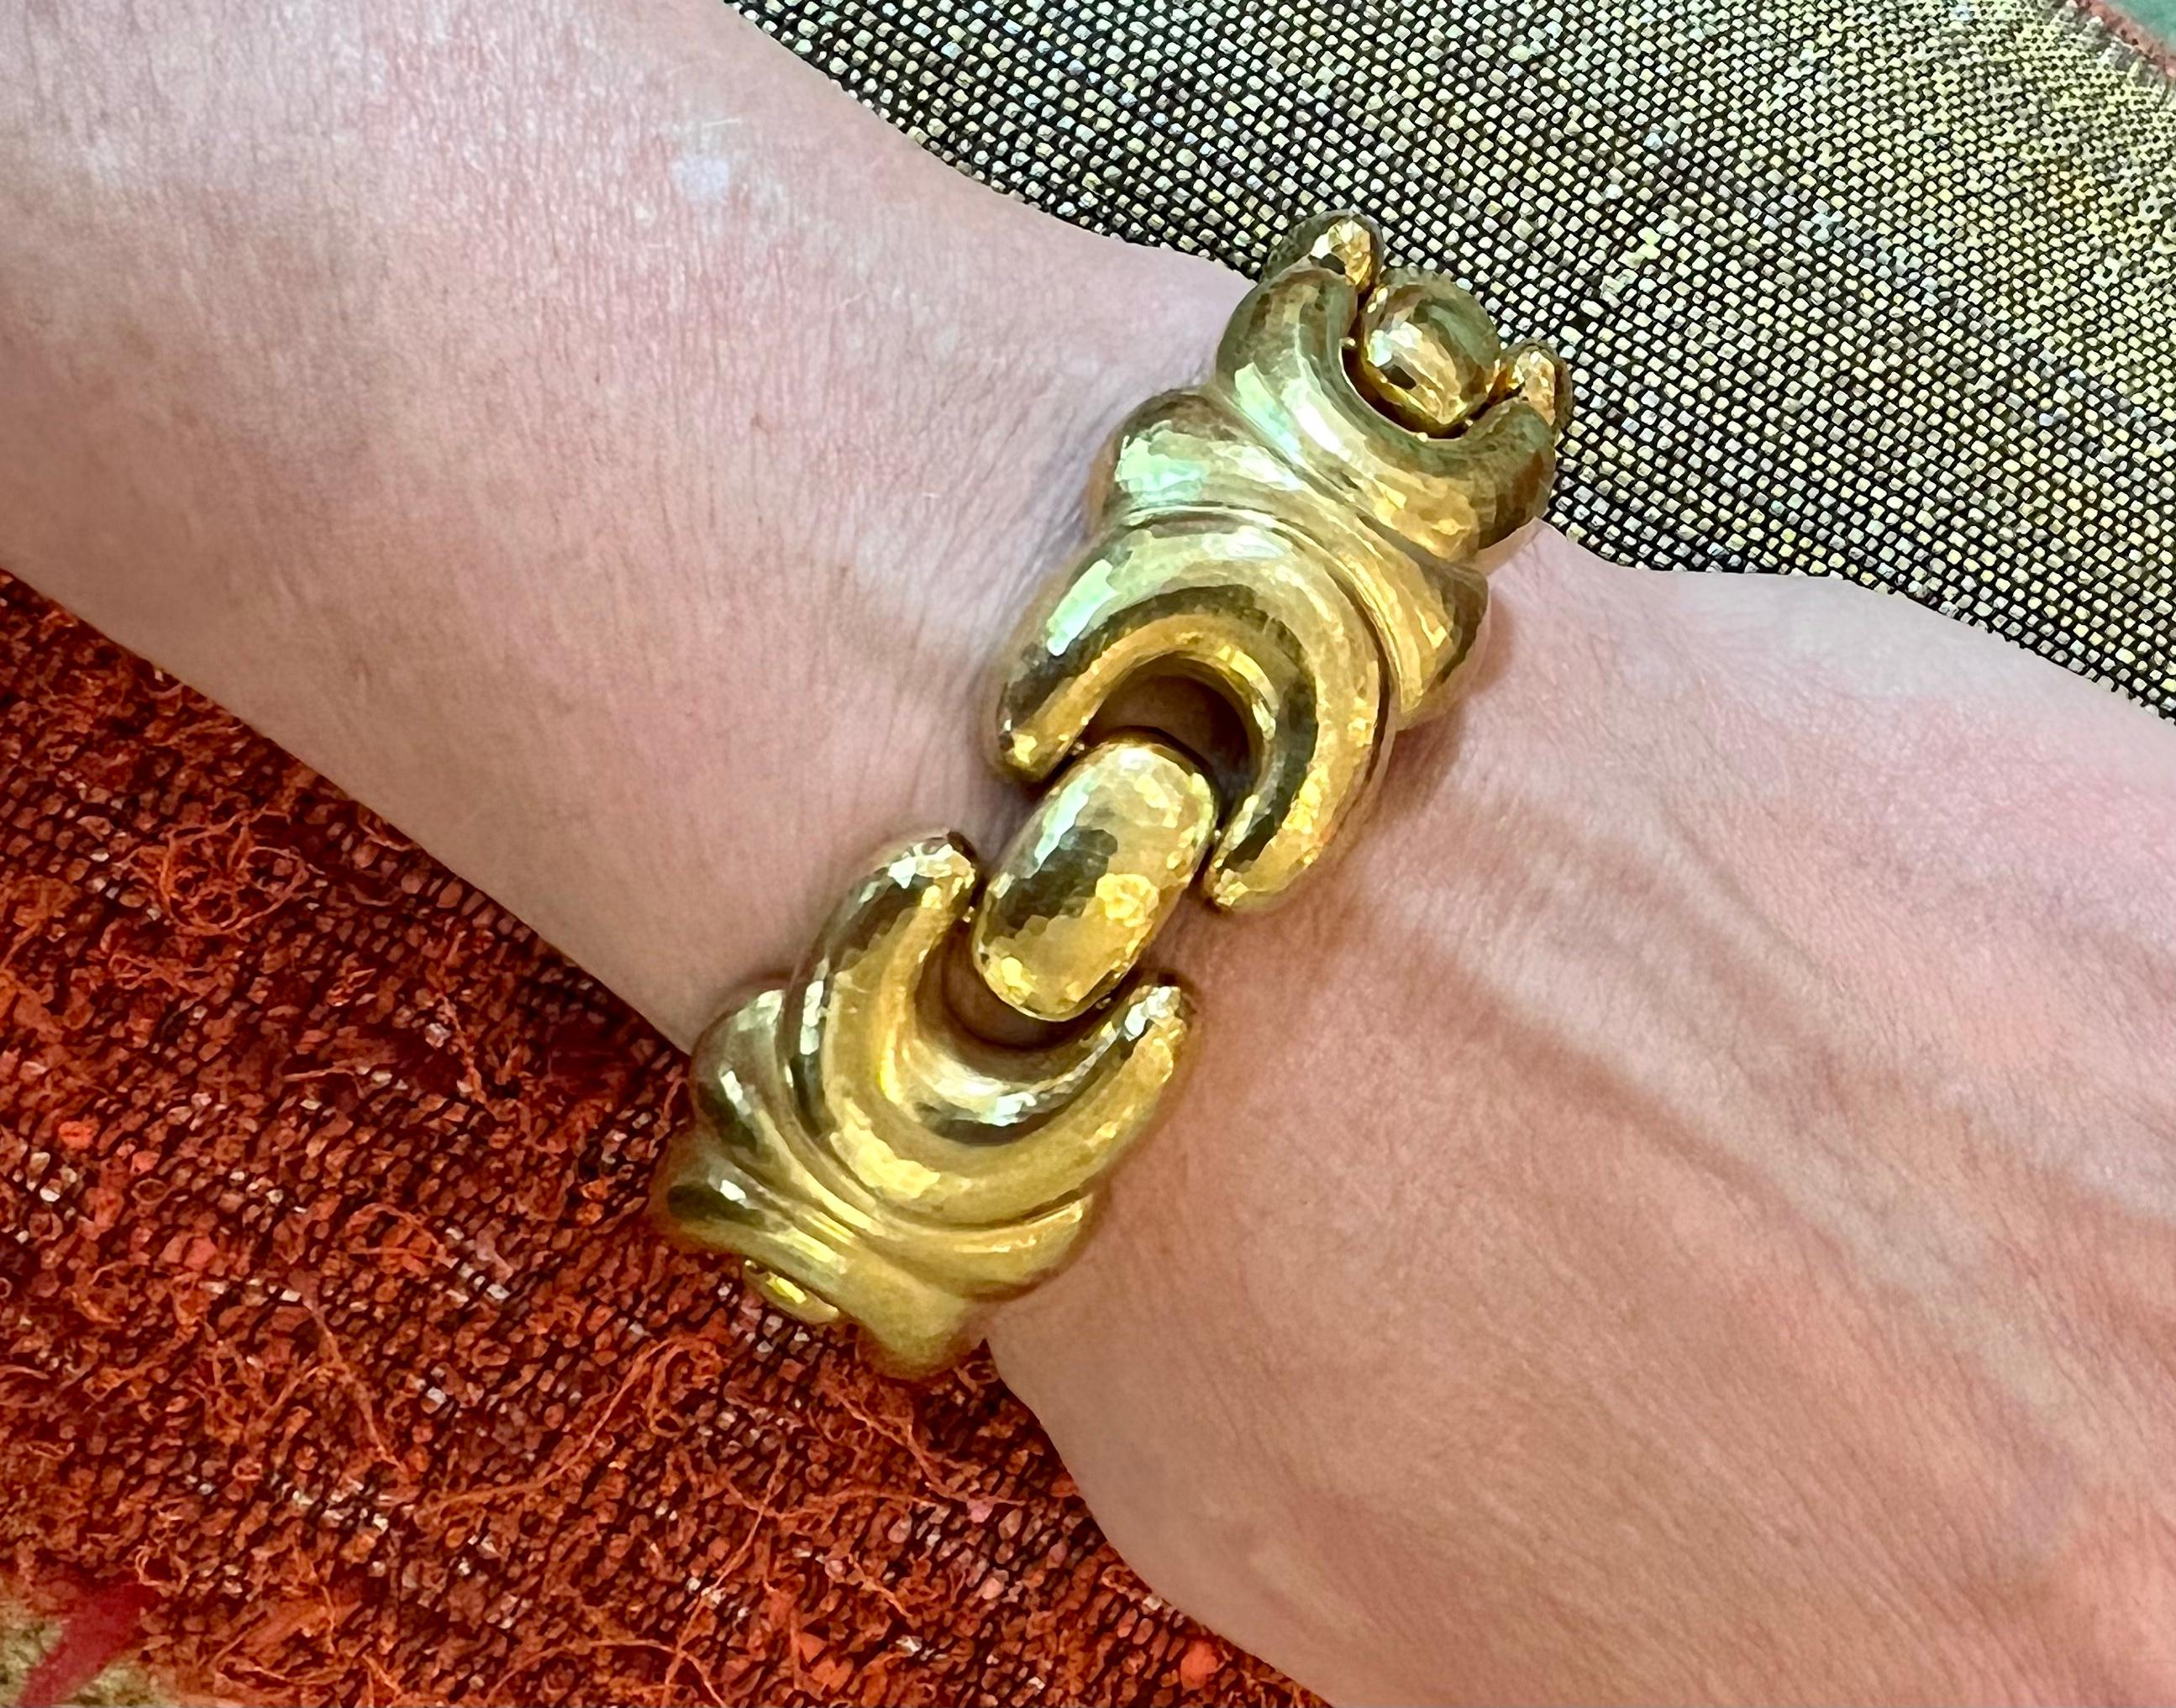 An unusually weighty (90 plus grams) 18 karat gold, hammered finish, puffed up, fancy floral  link bracelet with repousse design and box clasp closure,  by Leo de Vroomen. Signed de Vroomen (clasp), stamped LDV English Hallmarks London 750 letter